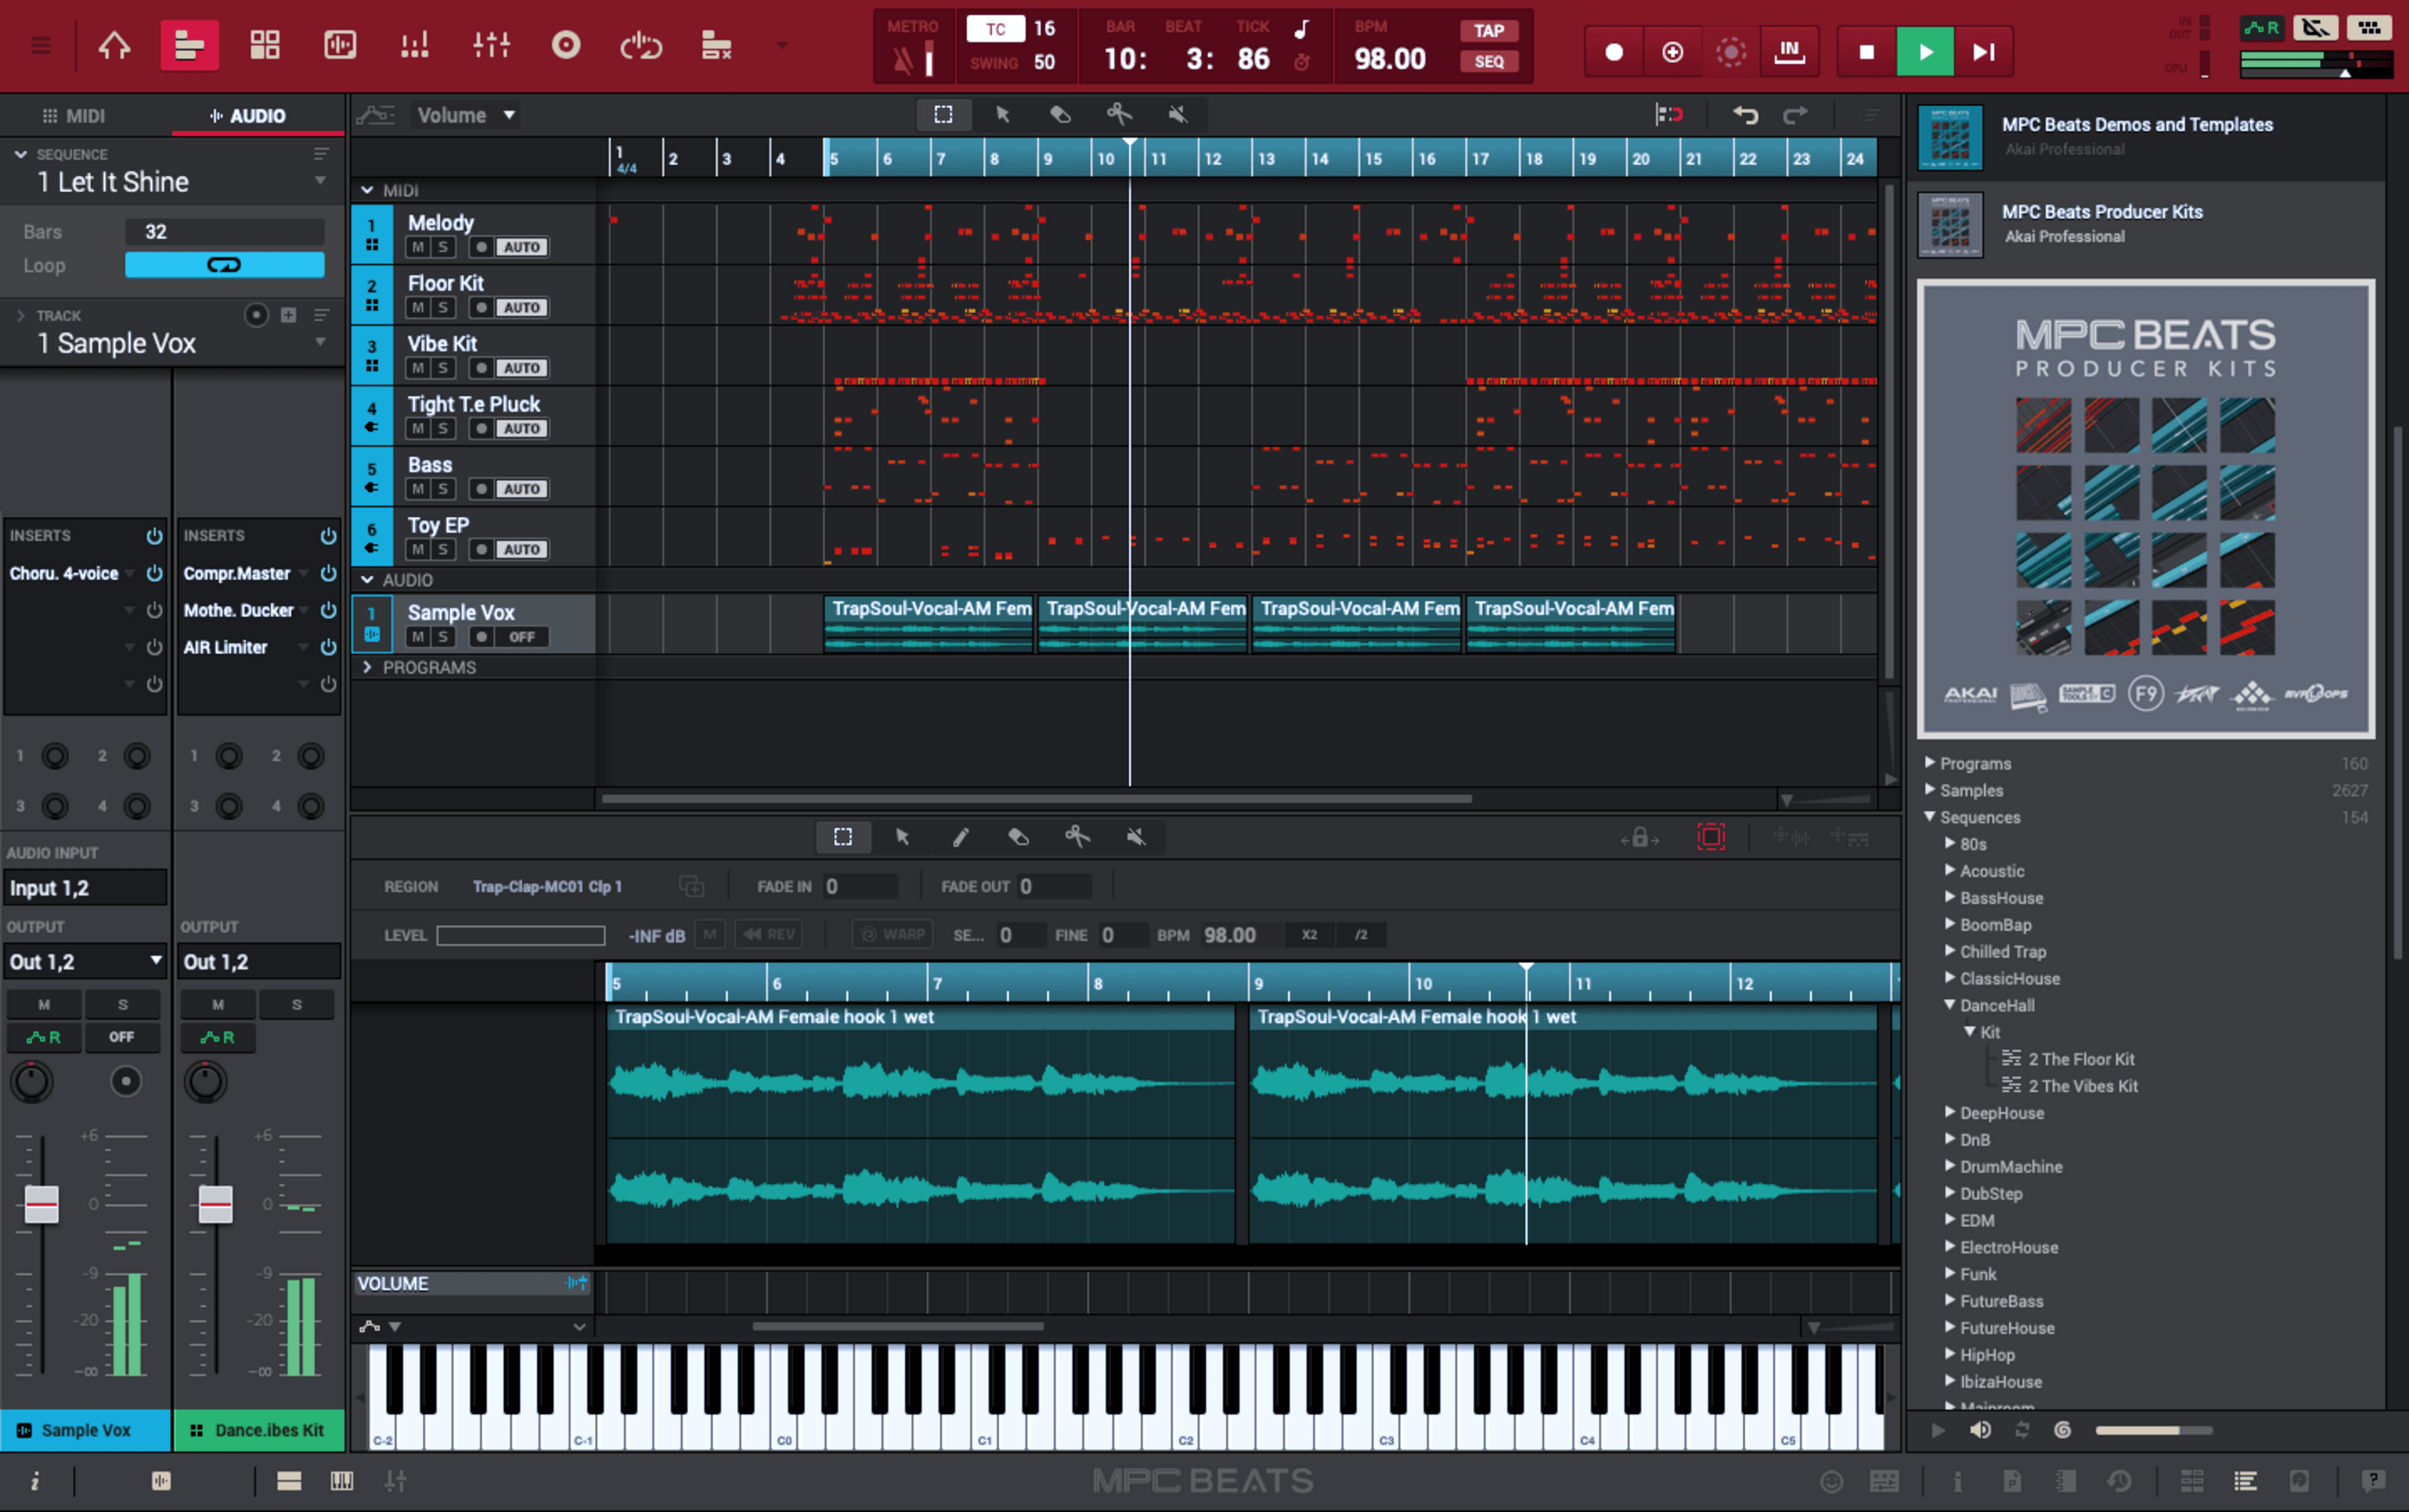 MUSIC MAKER: Free Song & Beat-Making Software for Everyone